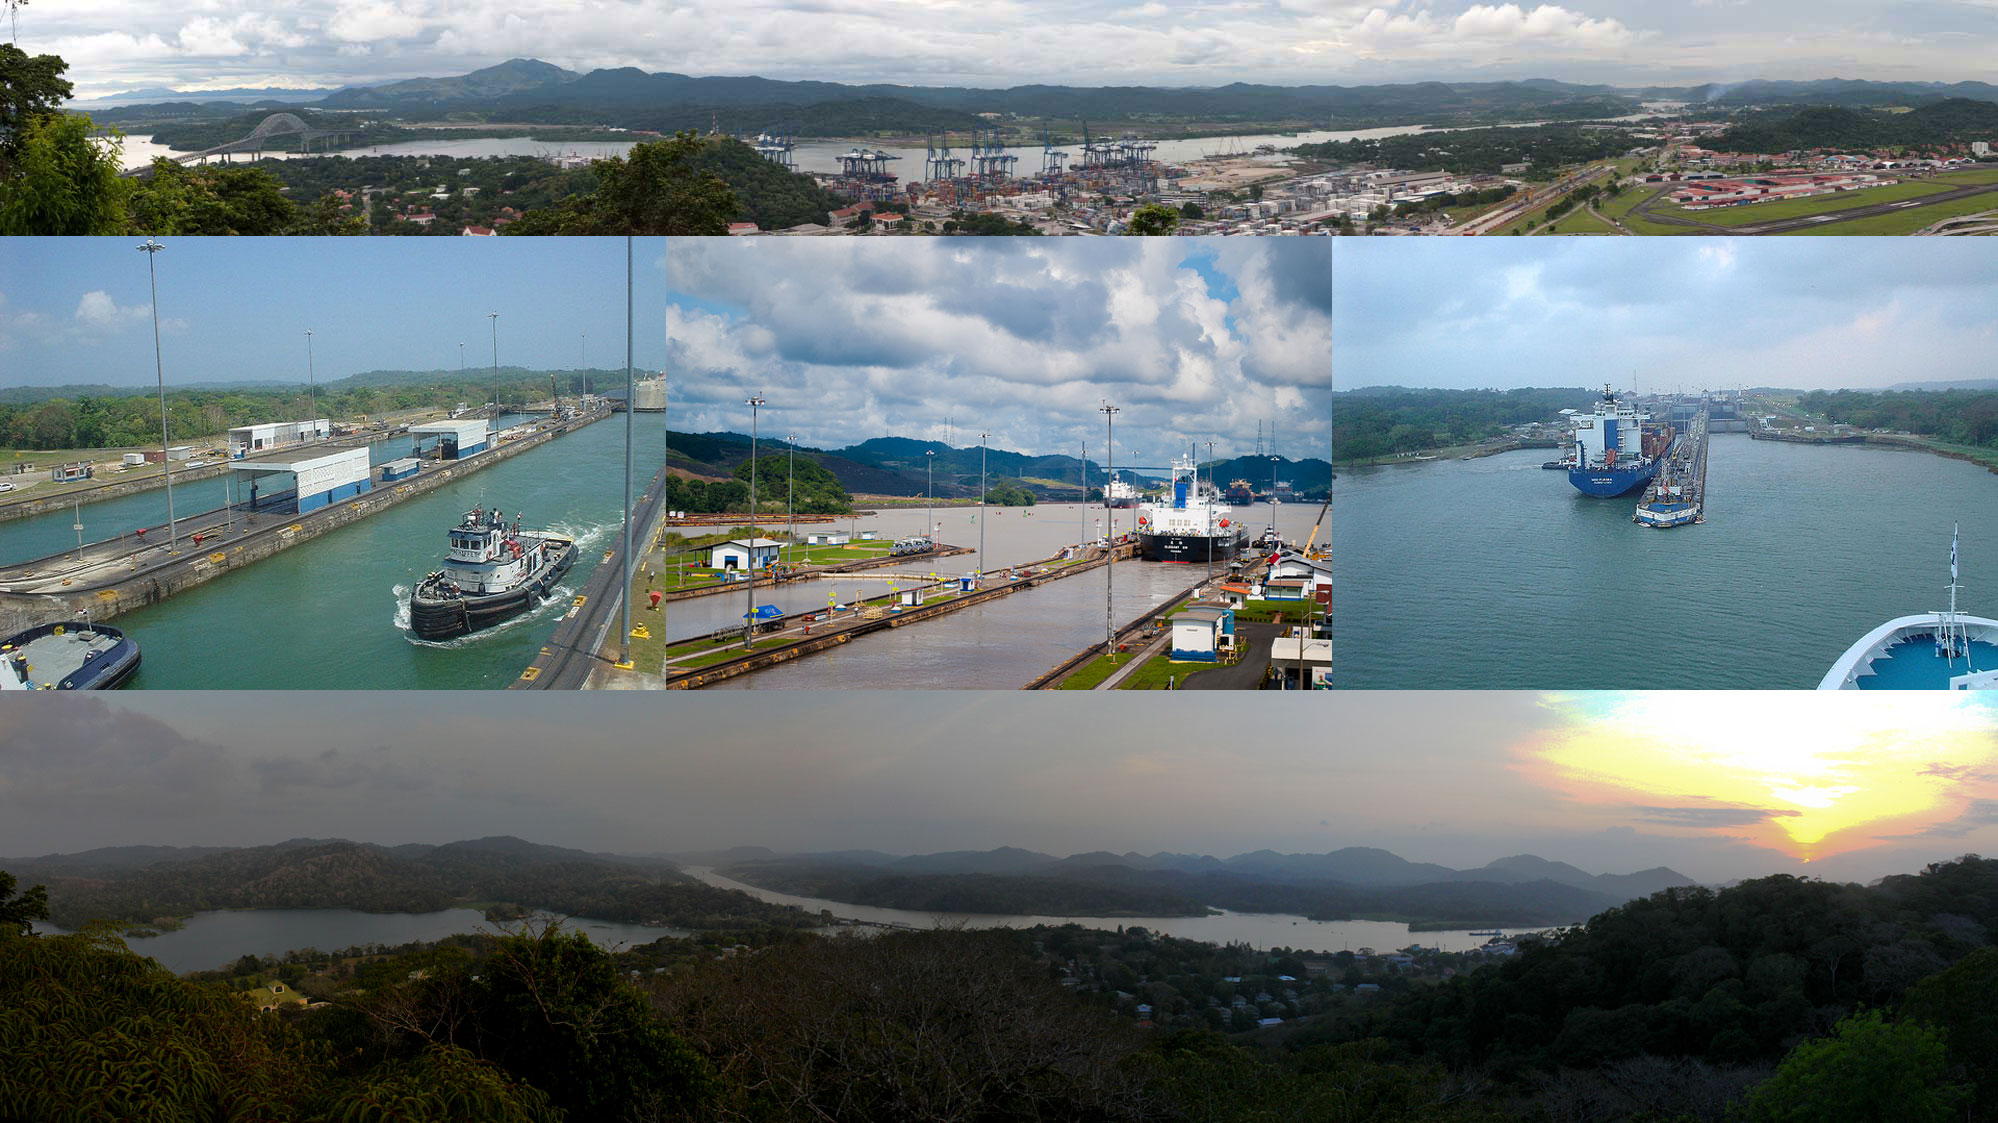 Fact: The Panama Canal connects the Pacific Ocean to the Atlantic Ocean